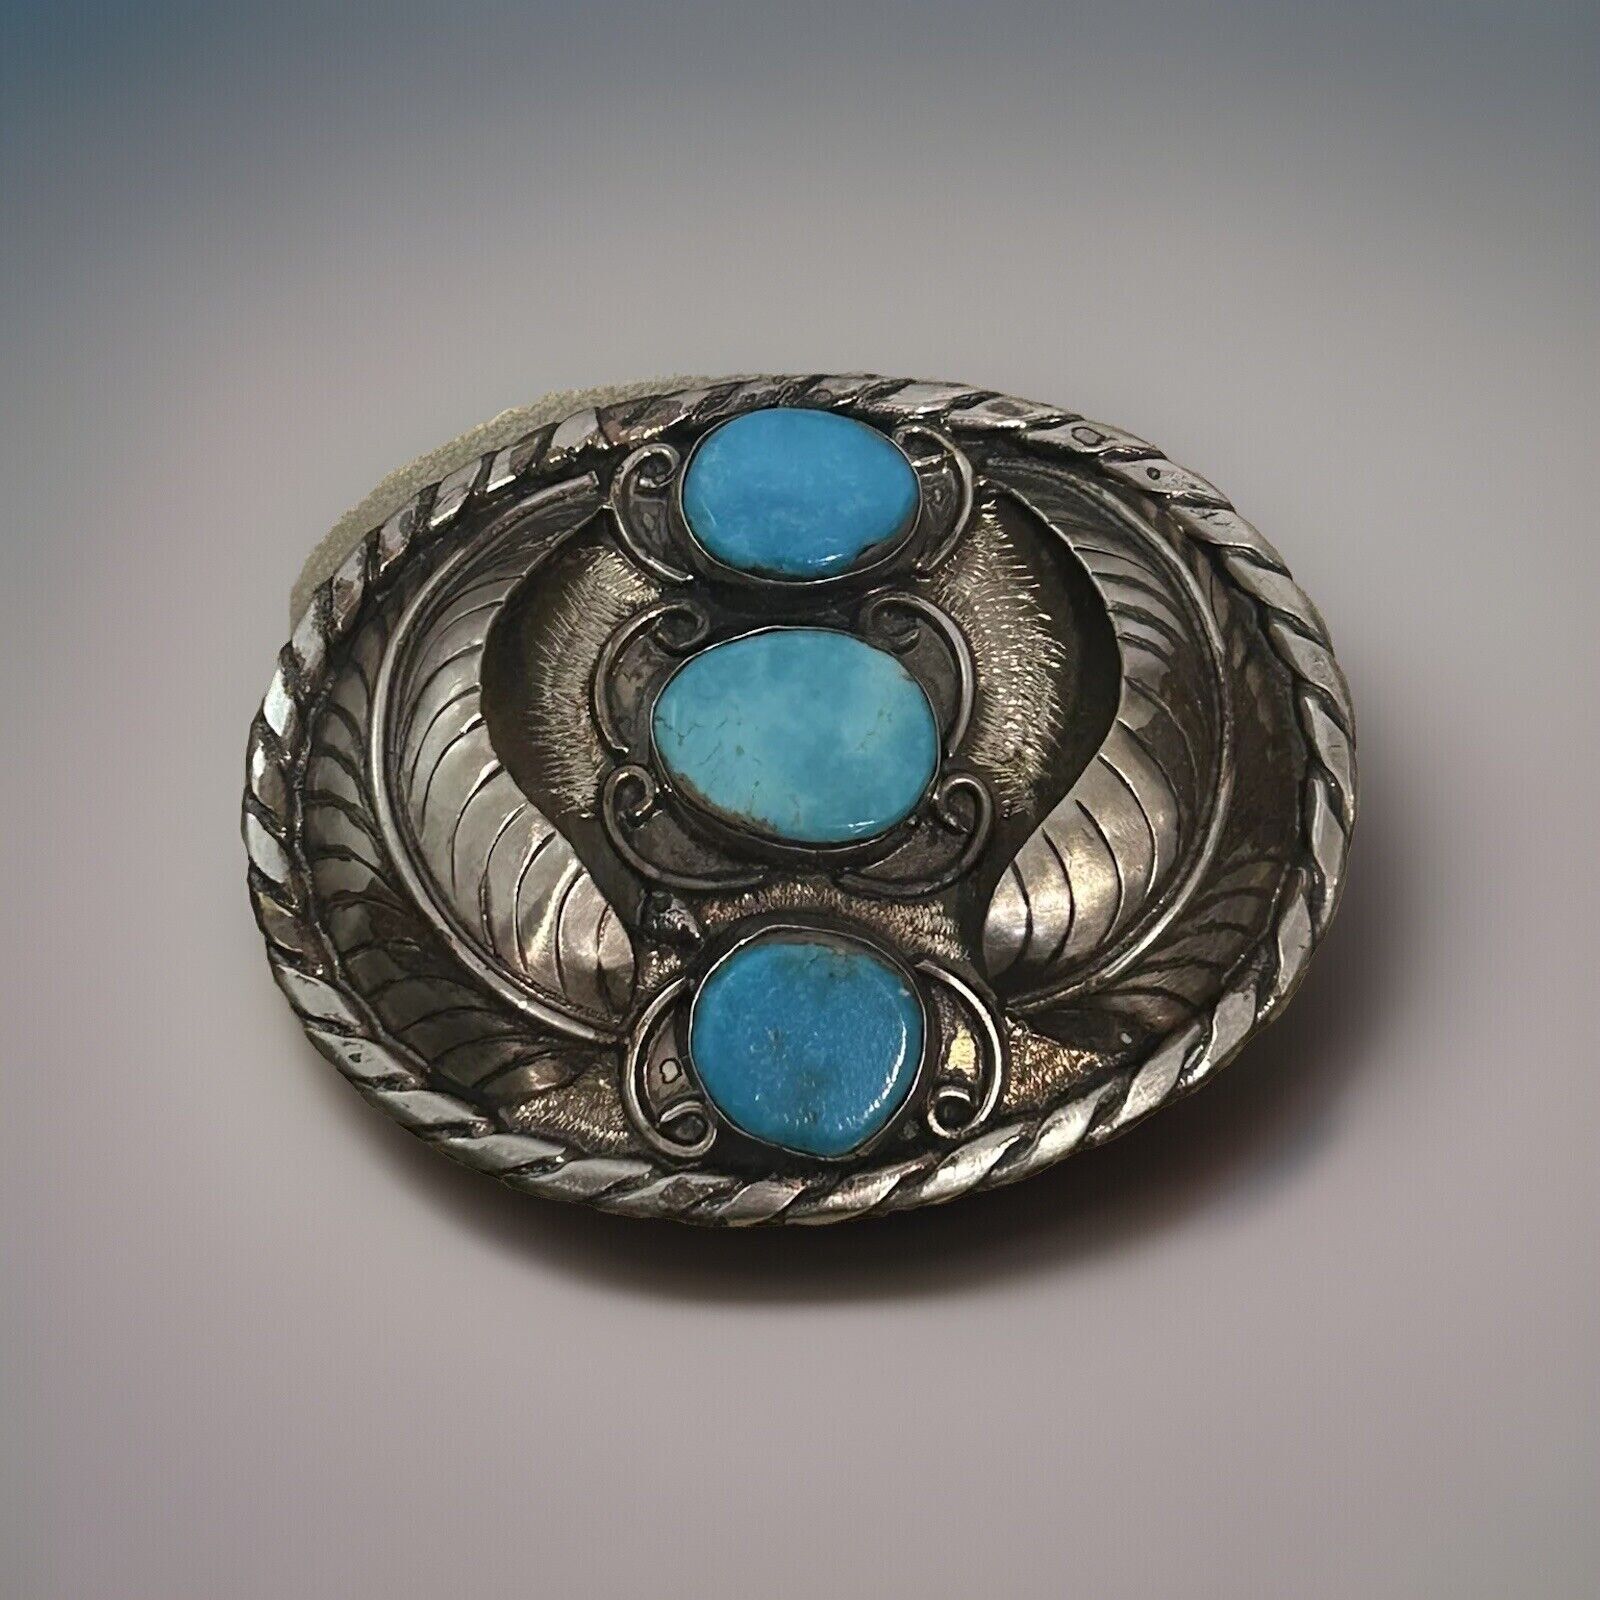 ▪️ONE OF A KIND NAVAJO  BLOSSOM BELT BUCKLE TURQUOISE STERLING SILVER ▪️